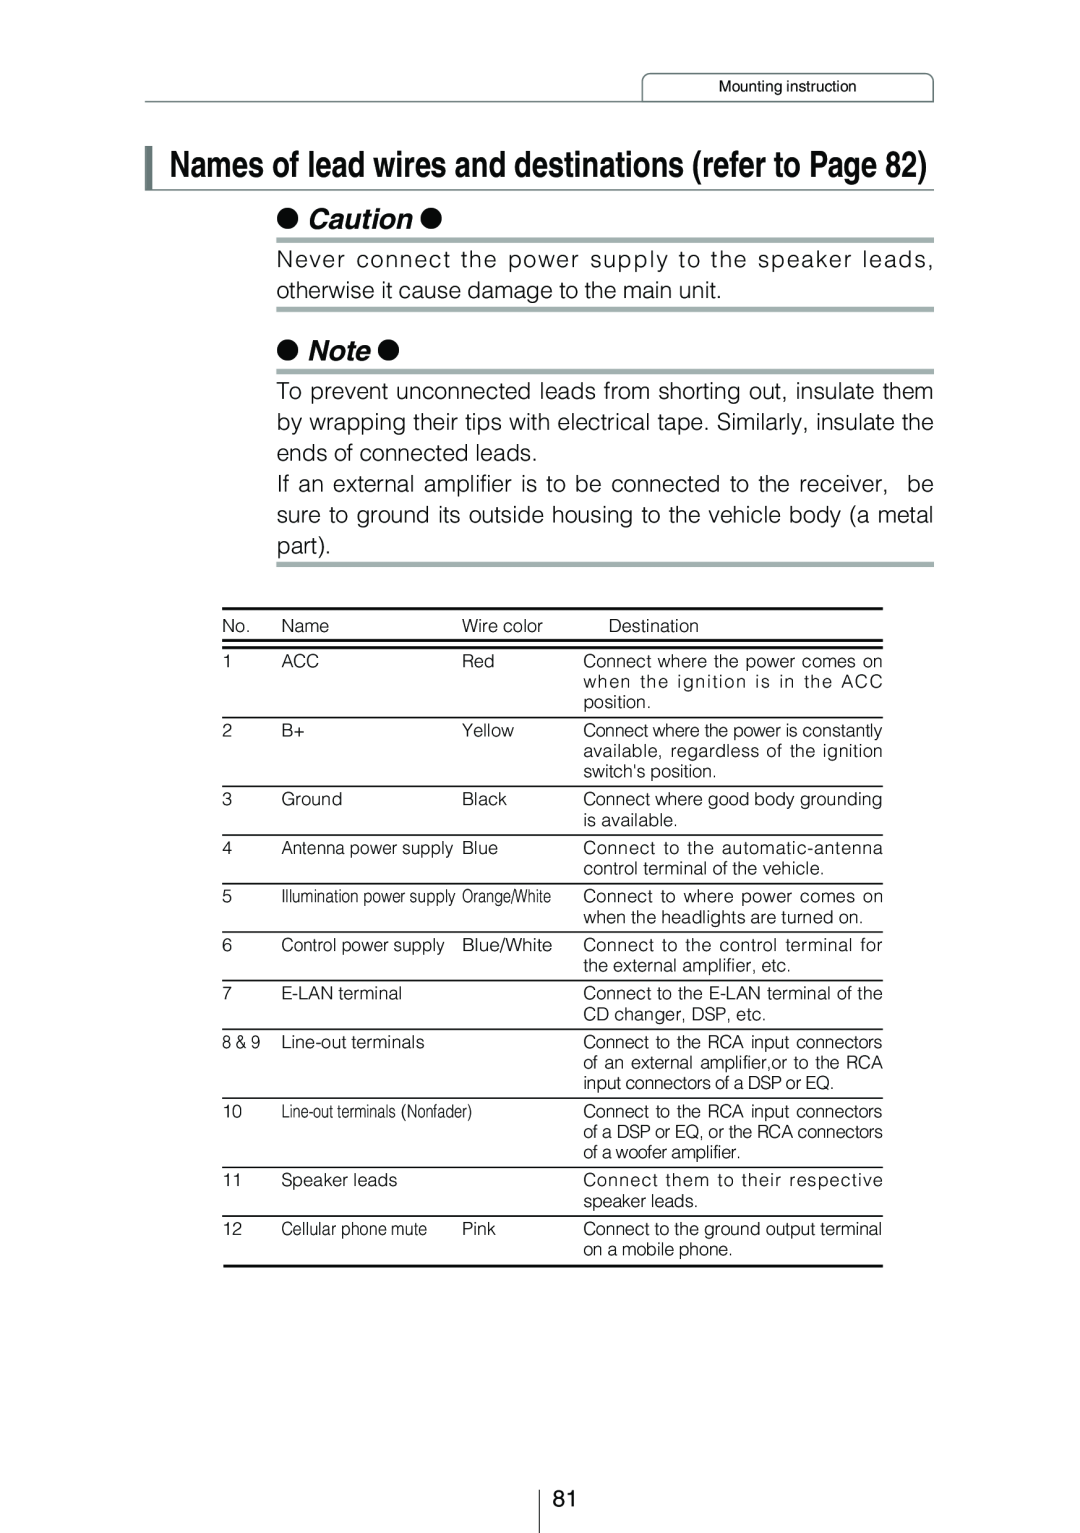 Eclipse - Fujitsu Ten CD3434 owner manual Names of lead wires and destinations refer to Page 